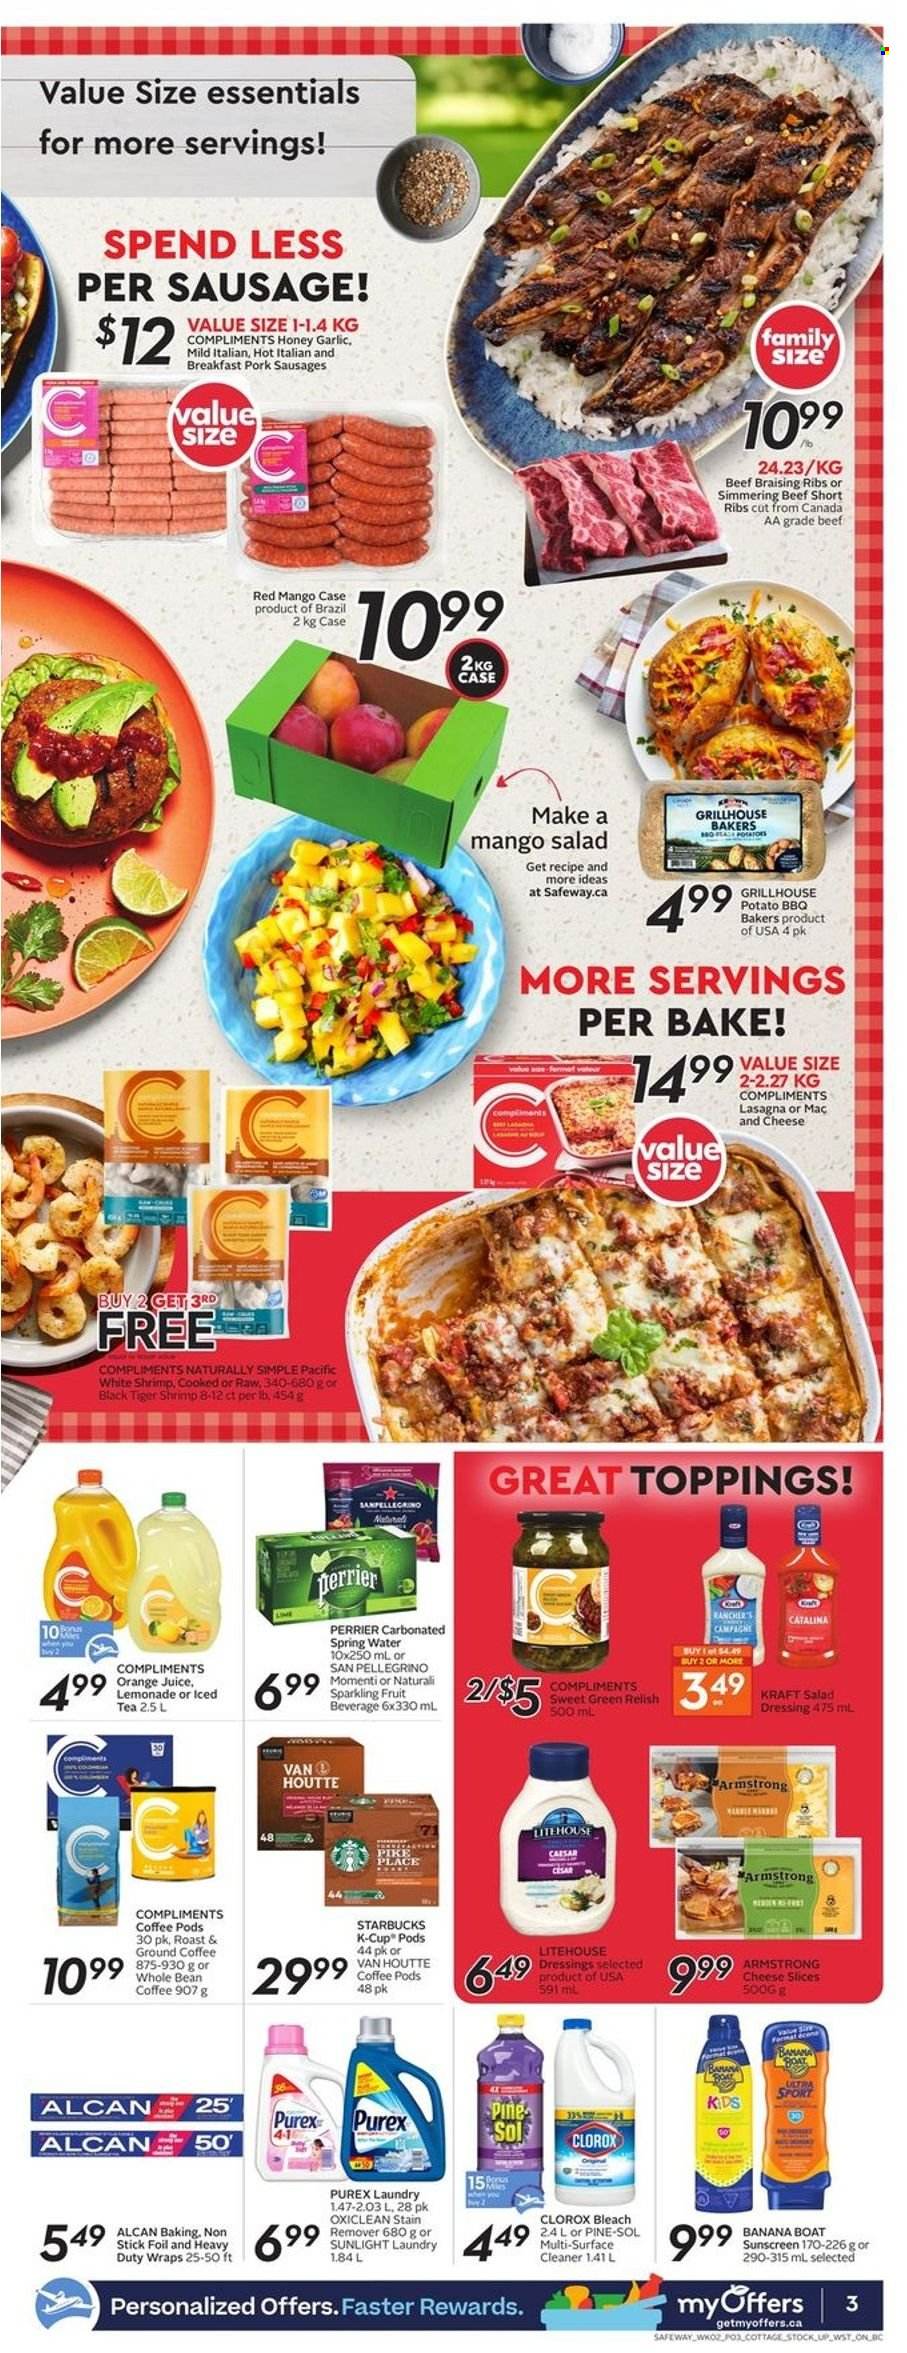 thumbnail - Safeway Flyer - May 12, 2022 - May 18, 2022 - Sales products - wraps, garlic, mango, shrimps, macaroni & cheese, lasagna meal, Kraft®, sausage, sliced cheese, salad dressing, dressing, honey, lemonade, orange juice, juice, ice tea, Perrier, spring water, San Pellegrino, coffee pods, ground coffee, coffee capsules, Starbucks, K-Cups, beef ribs, surface cleaner, cleaner, bleach, stain remover, Clorox, Pine-Sol, OxiClean, Sunlight, Purex, Bakers. Page 4.